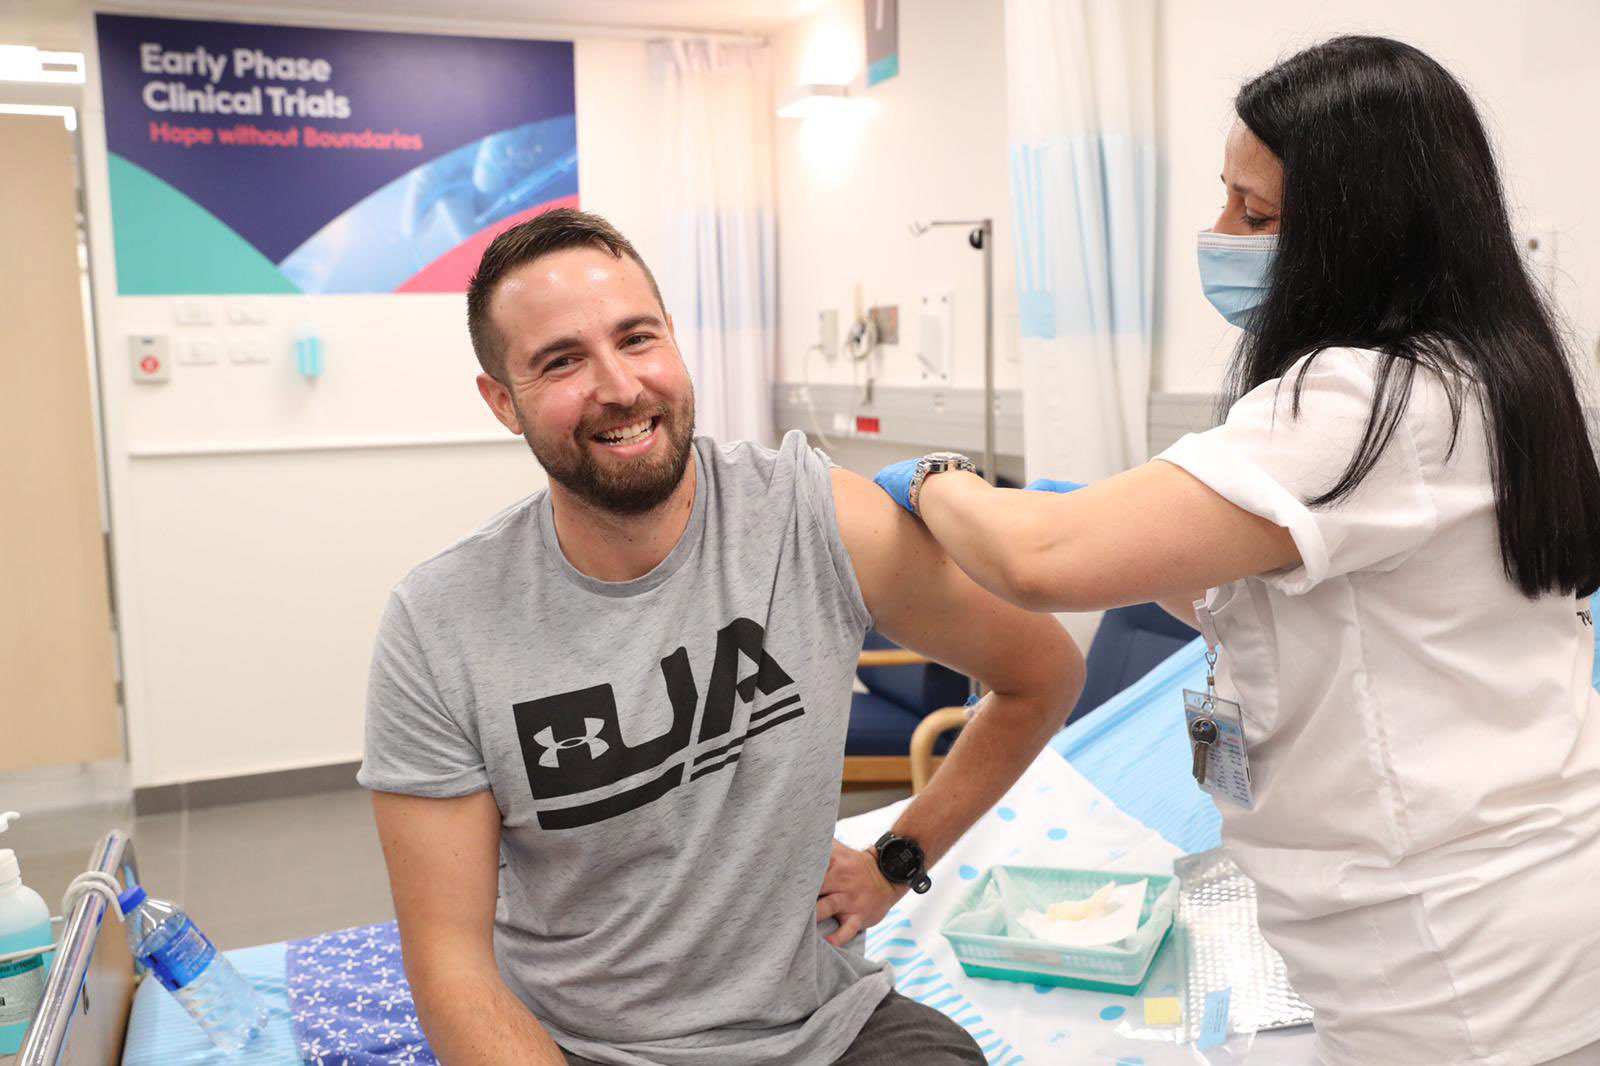 Nurse Hela Litwin administers the first Covid-19 vaccine developed by the Israel Institute of Biological Research to Segev Harel, the first volunteer, at Sheba Medical Center near Tel Aviv. Israel's Ministry of Defense posted this photo on Twitter on November 1.